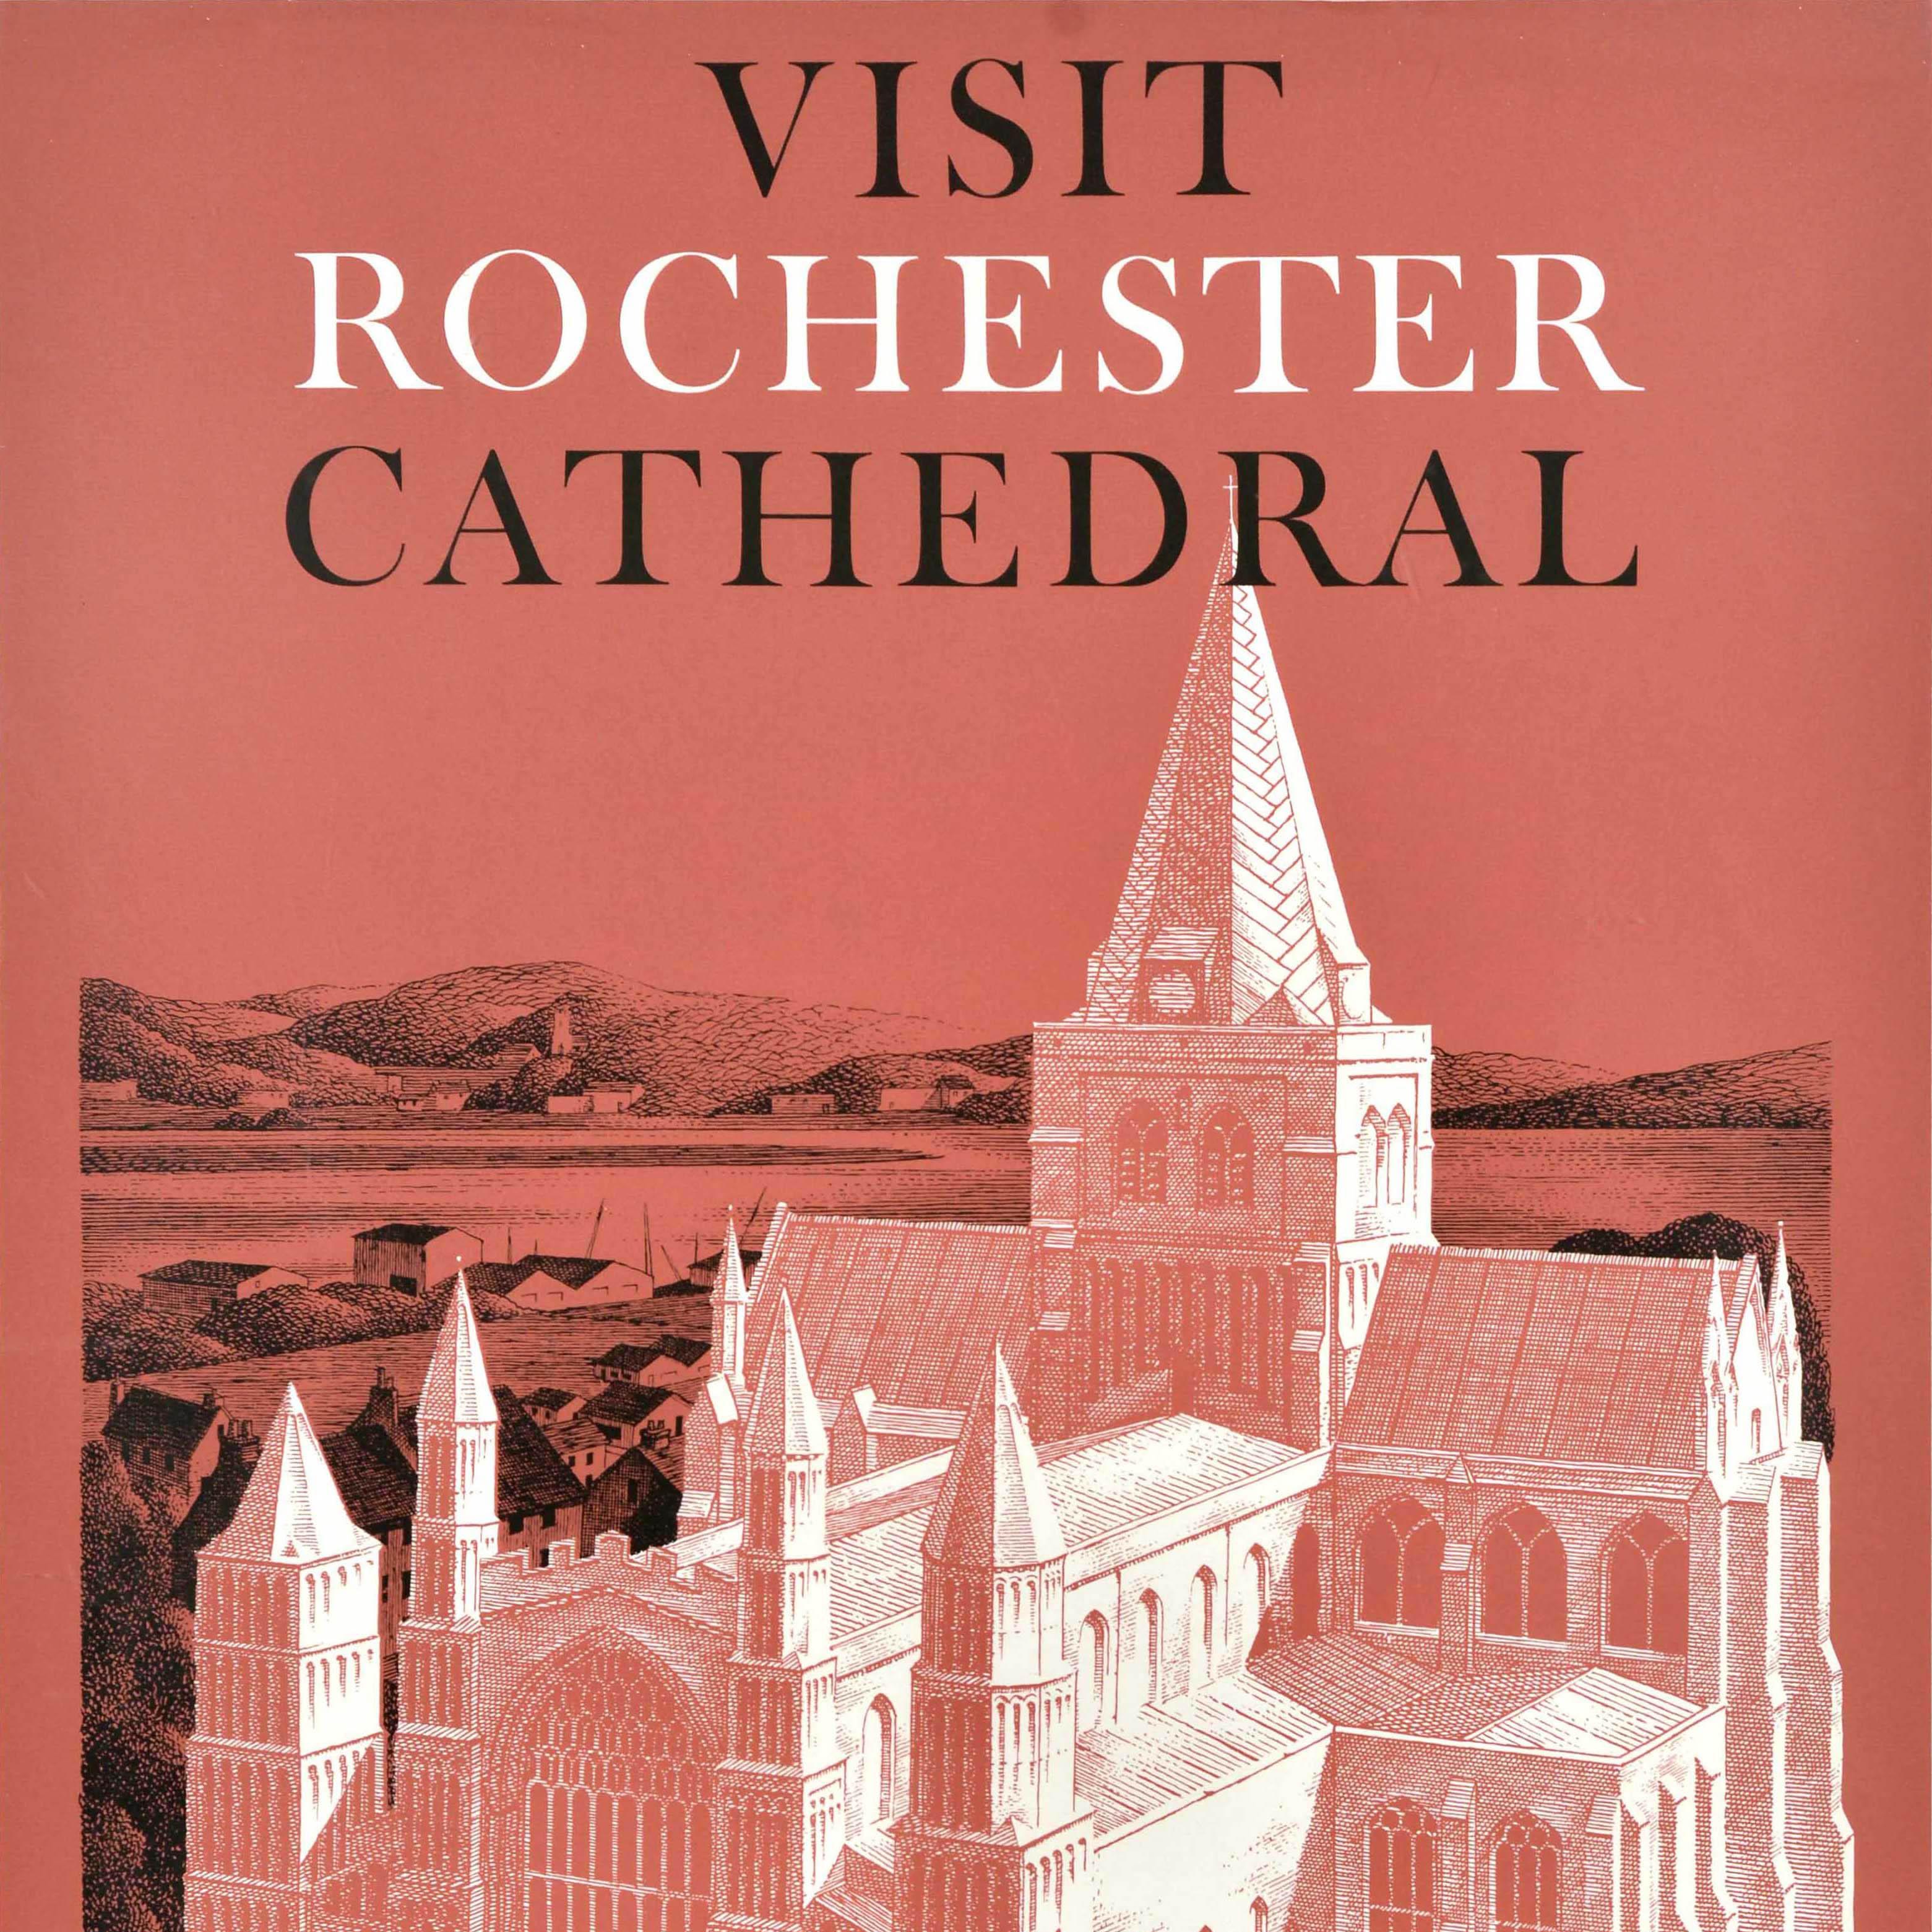 Original vintage train travel poster - Visit Rochester - featuring artwork by the notable commercial artist and poster designer Reginald Montague Lander (1913-1980) depicting the historic Rochester Cathedral in white with the surrounding trees,